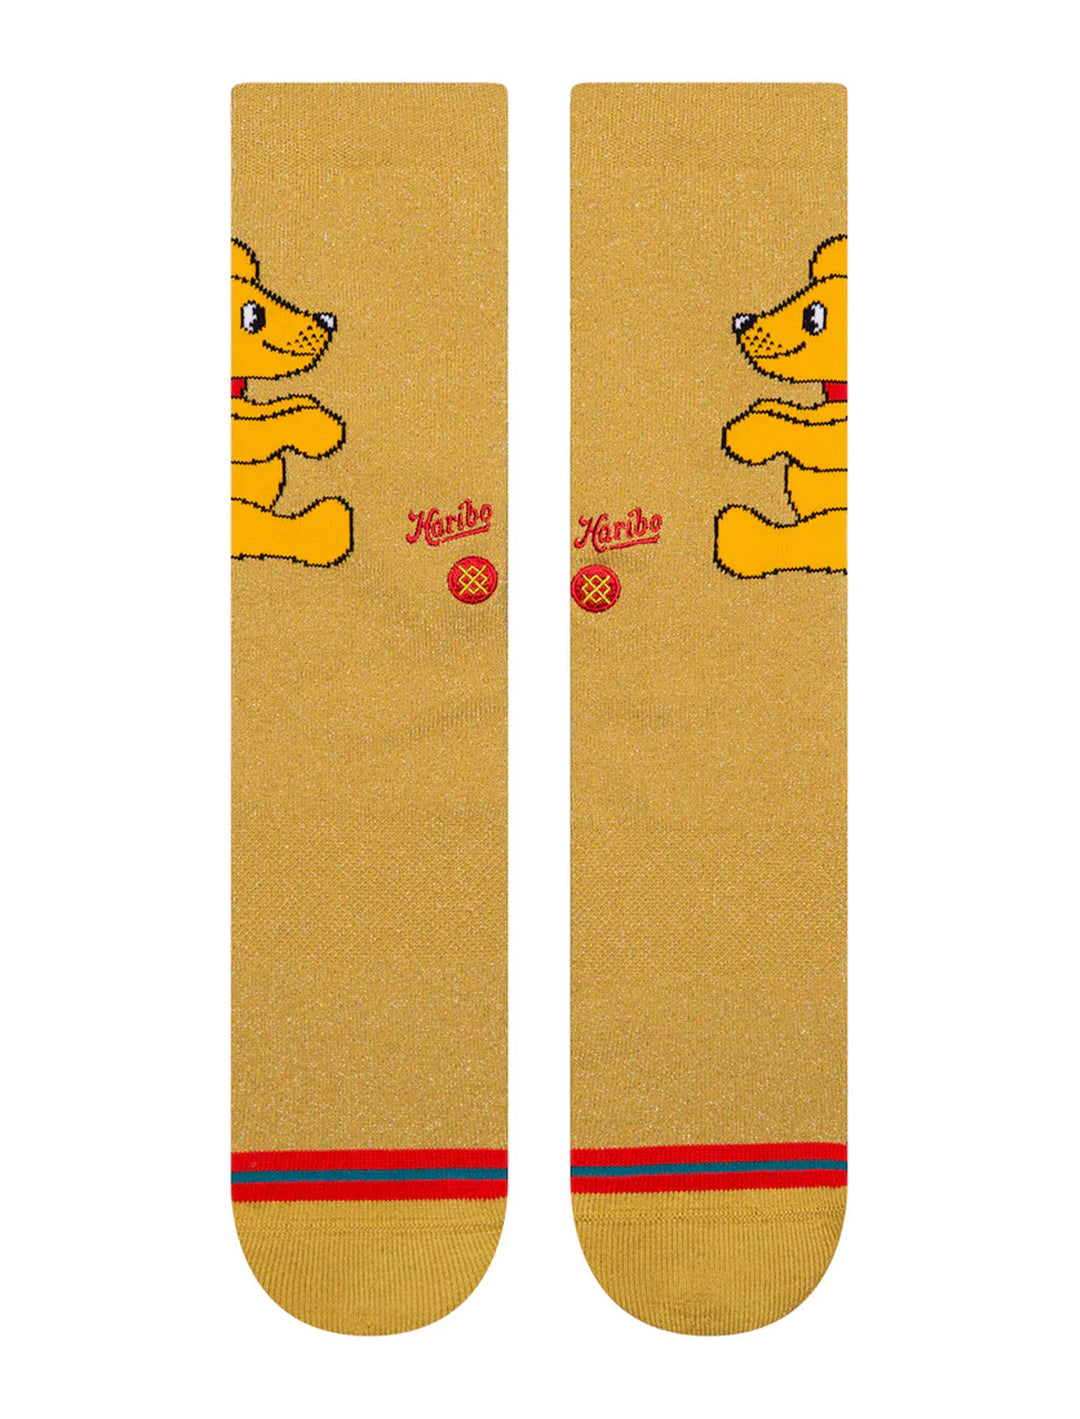 Front view of Stance's gummiebear crew socks.